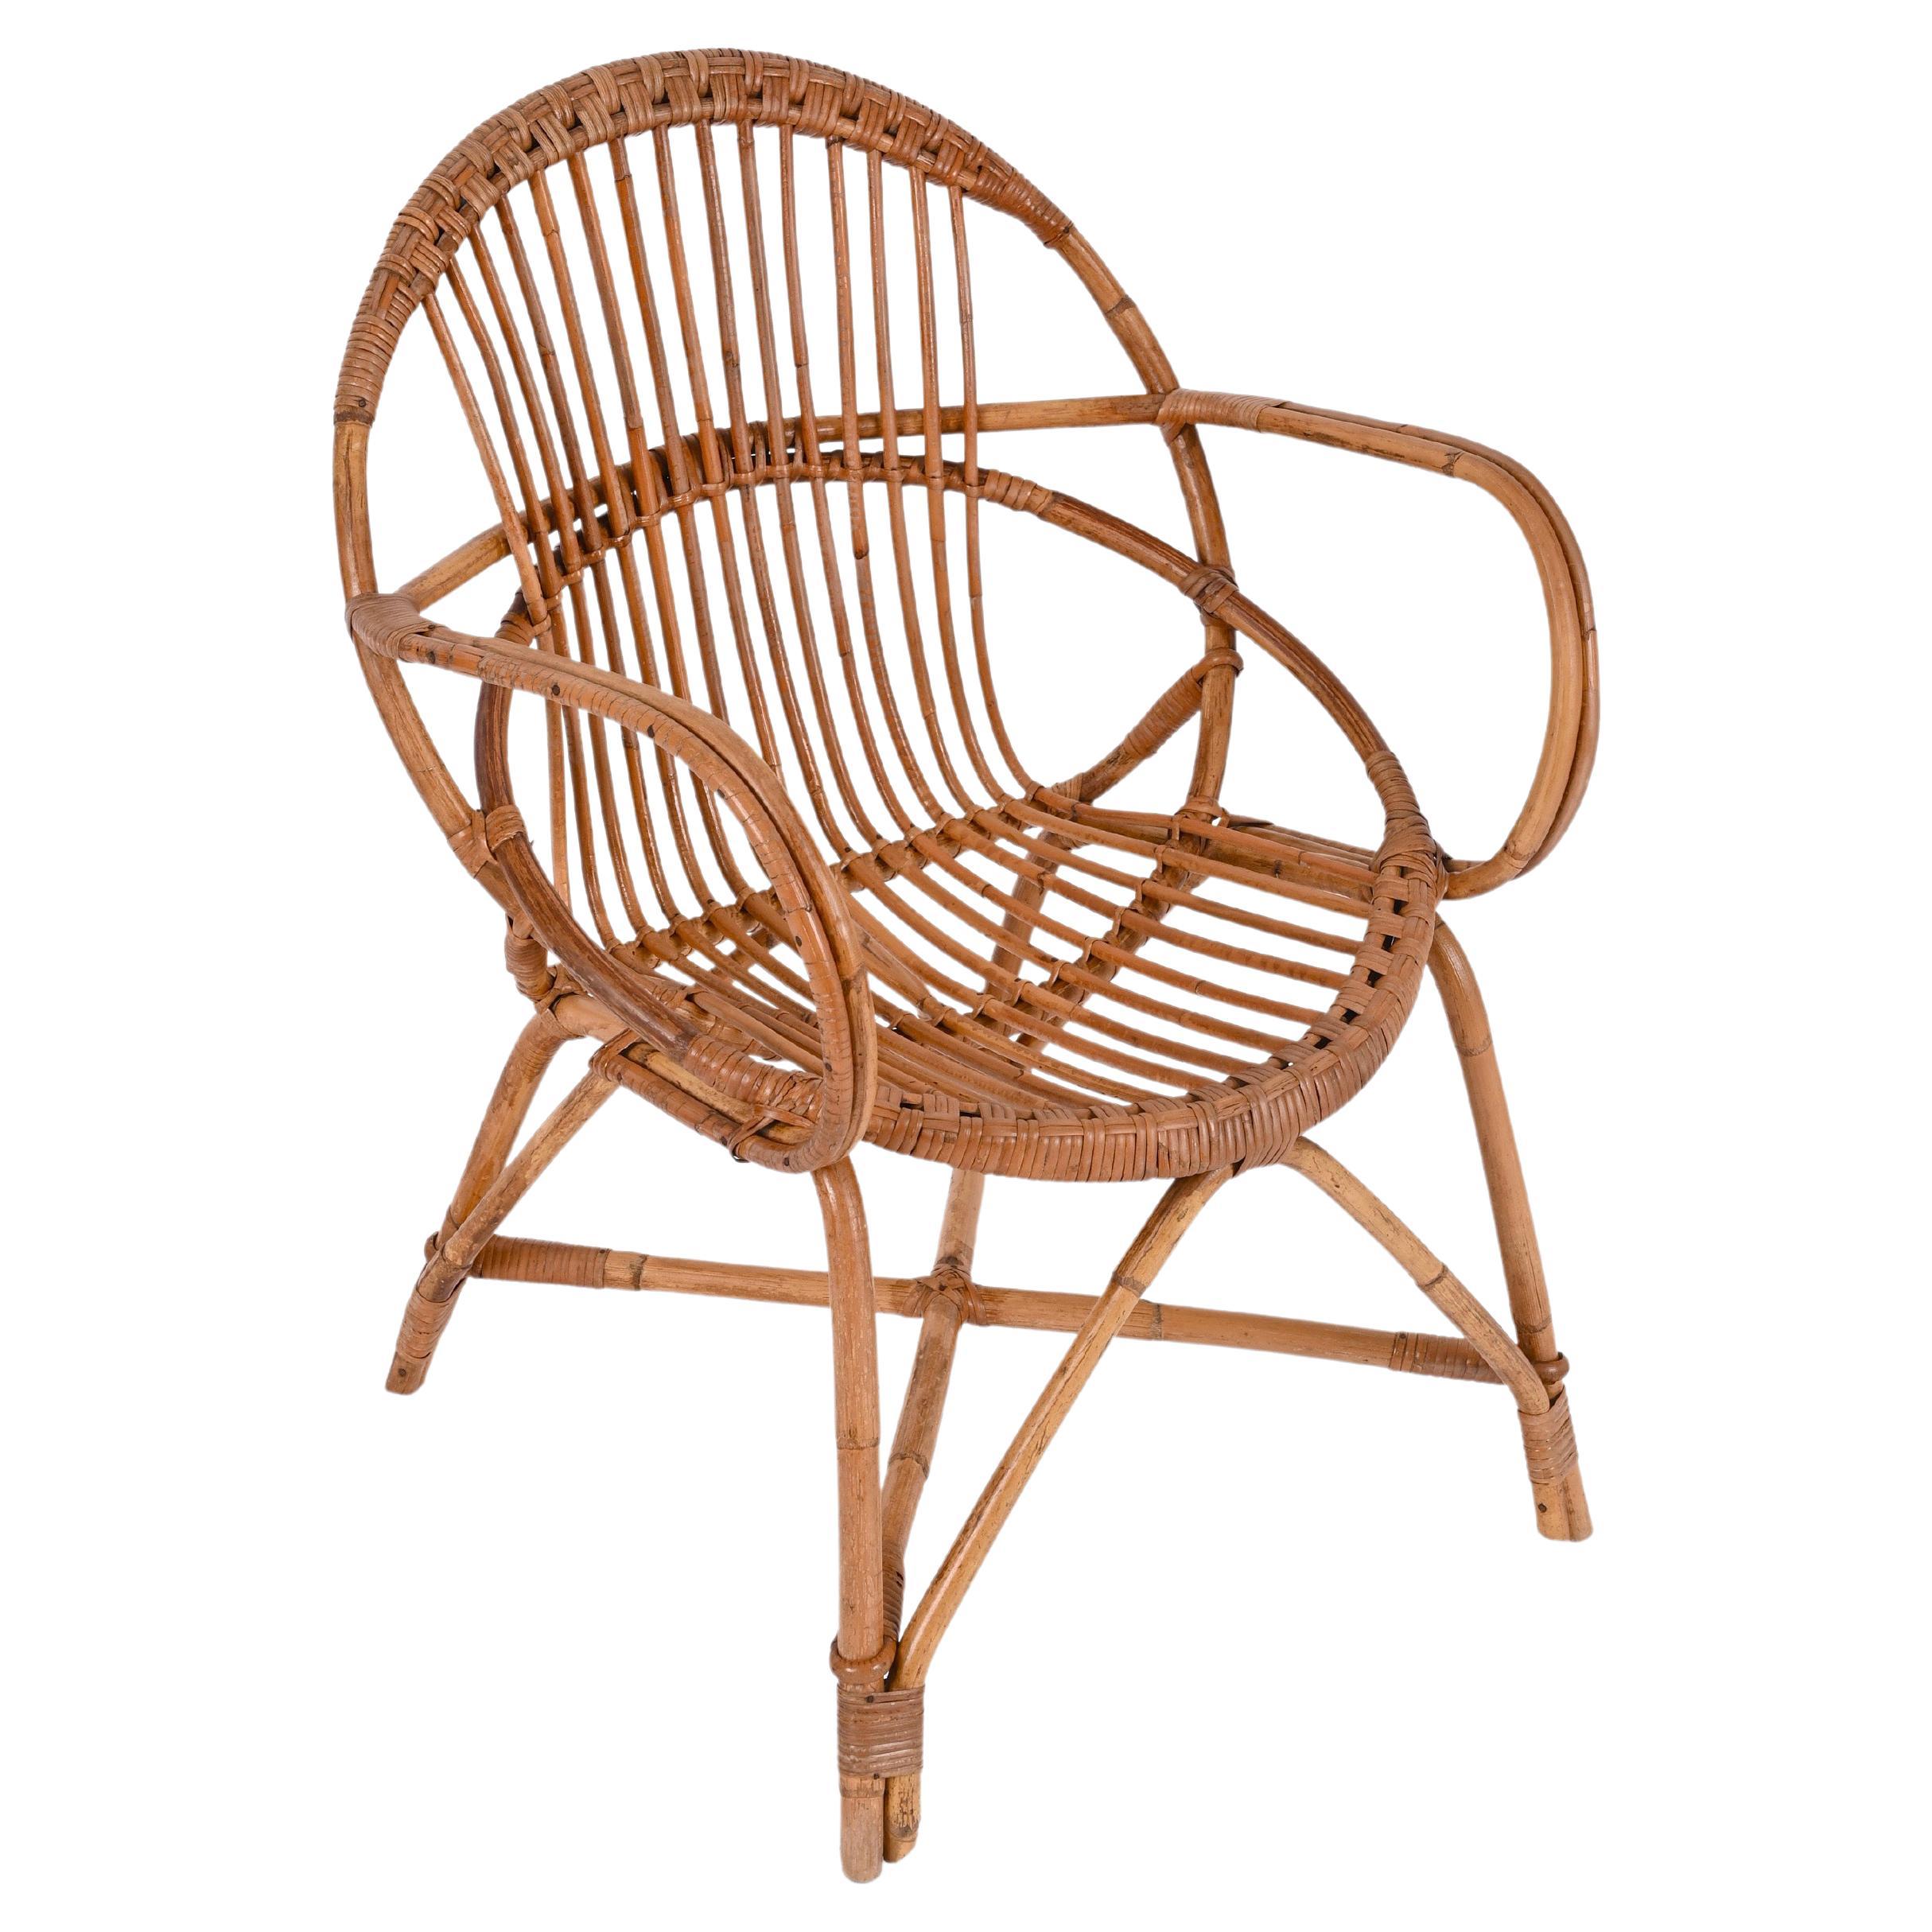 Midcentury Franco Albini Rattan and Bamboo Shell-Shaped Armchair, Italy, 1950s For Sale